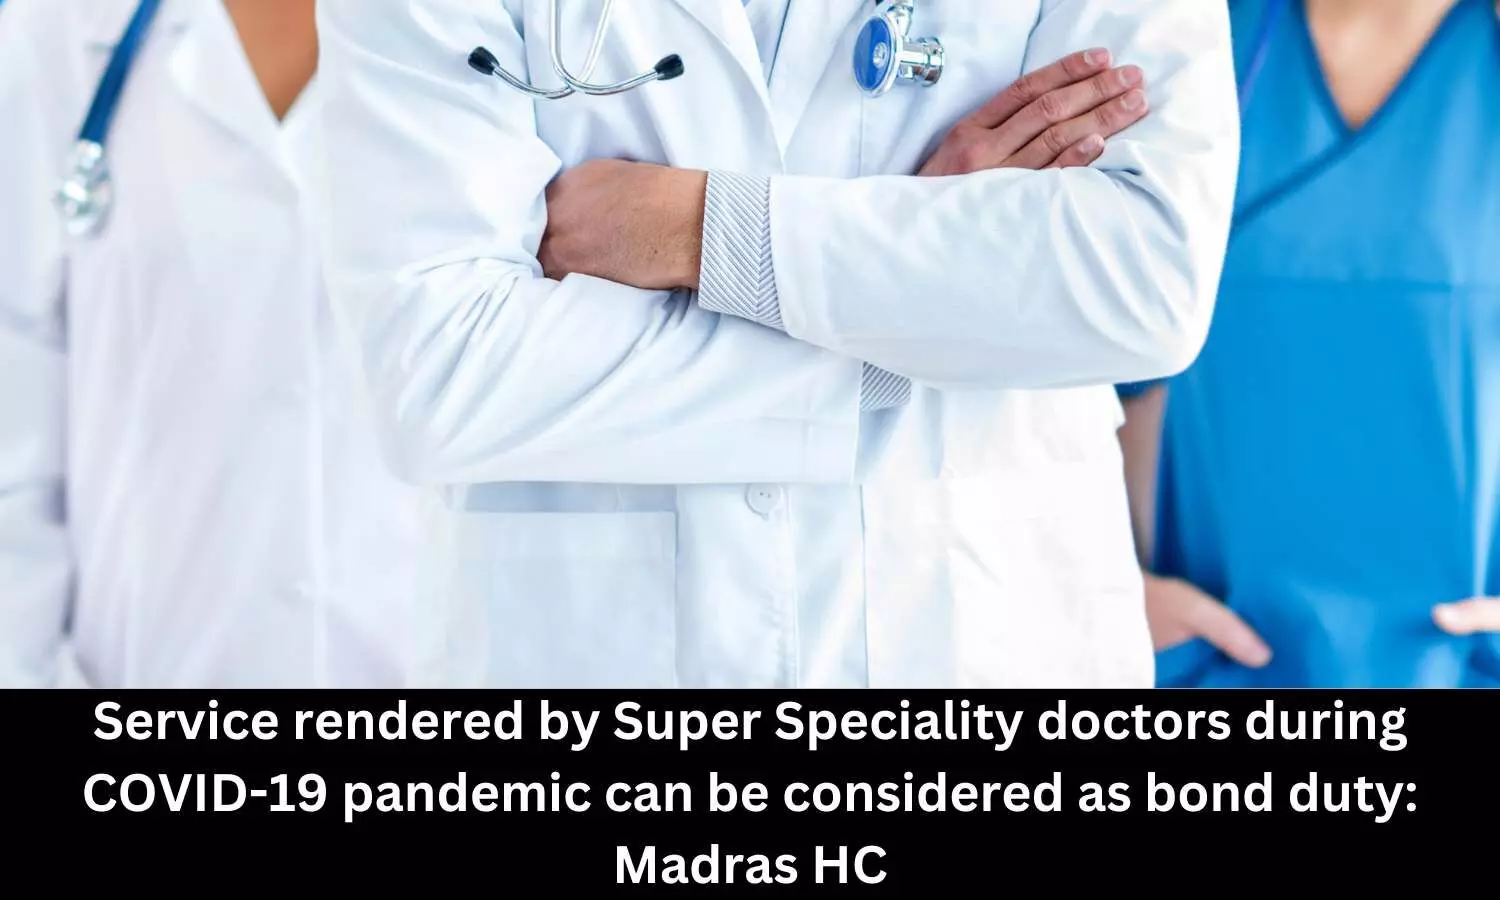 Service rendered by Super Speciality doctors during COVID pandemic can be considered as bond duty, says Madras HC